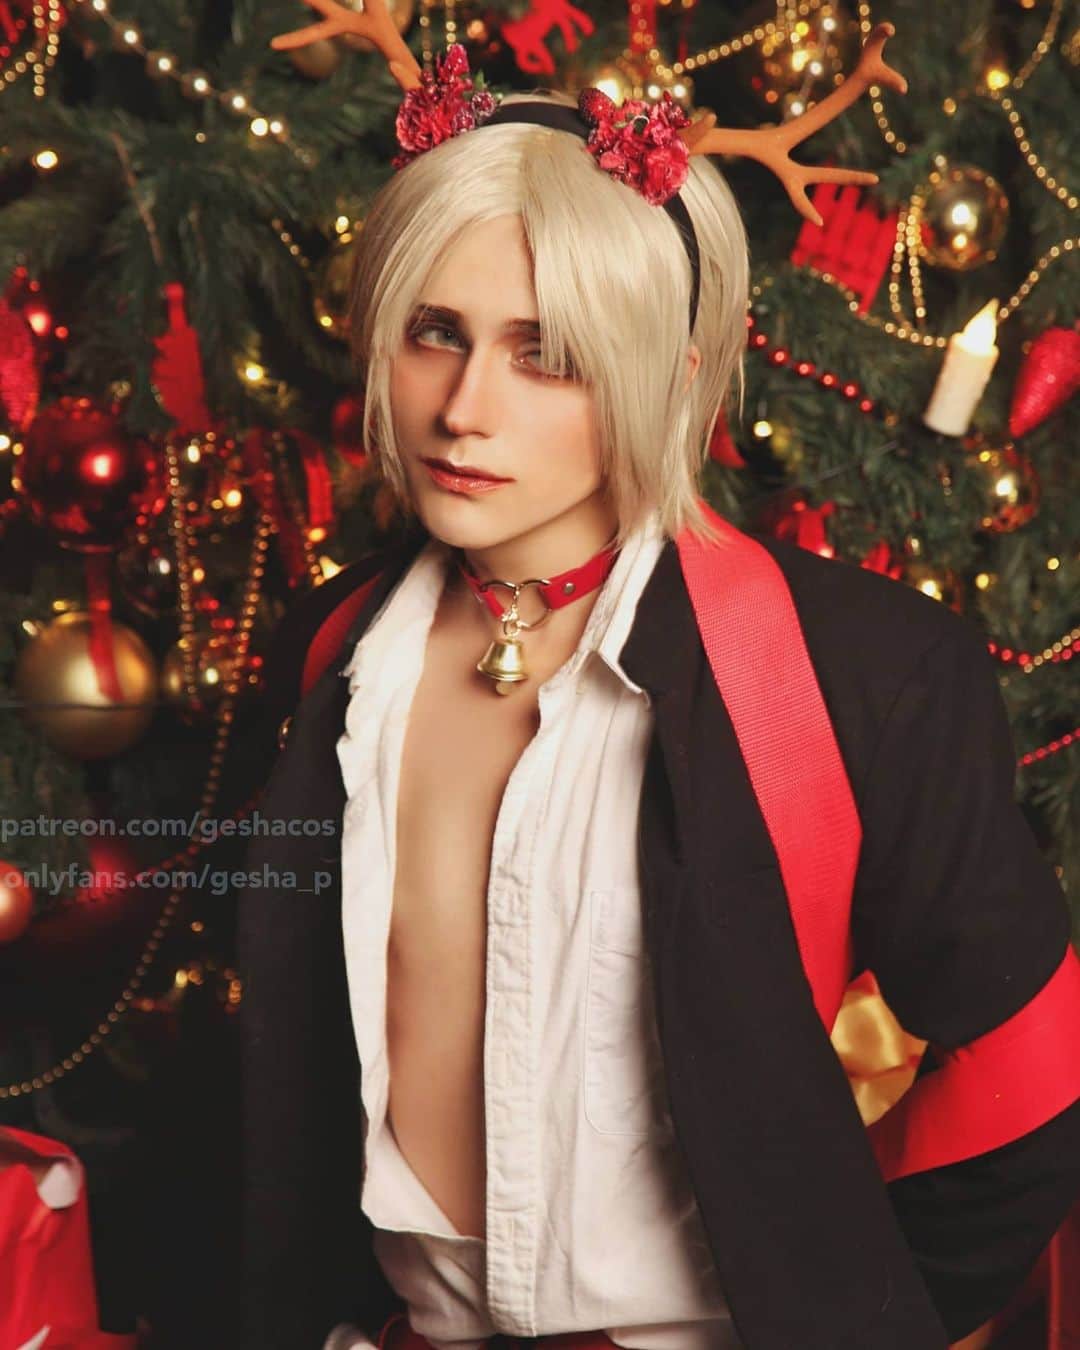 Gesha Petrovichのインスタグラム：「Happy 2021 🎄🎊🎉 Repost  #JianYi For good luck 😜🙏🥺❤️🦌🦌🦌🦌🦌🦌🦌🦌 #oldxian  #19DAYS  #old先  Wig @geshacos Ph @Diemaru_Sol  Full wallpaper for any tier ☺️ 1/3 of this photoshoot avaliable for my "Honey" tier  2/3 of this photoshoot avaliable for my "Angel"tier Full photoset + NSFW +extra 🌶️ for my "Muse" tier P♥️treon👇 In end of month☃️☃️☃️☃️」